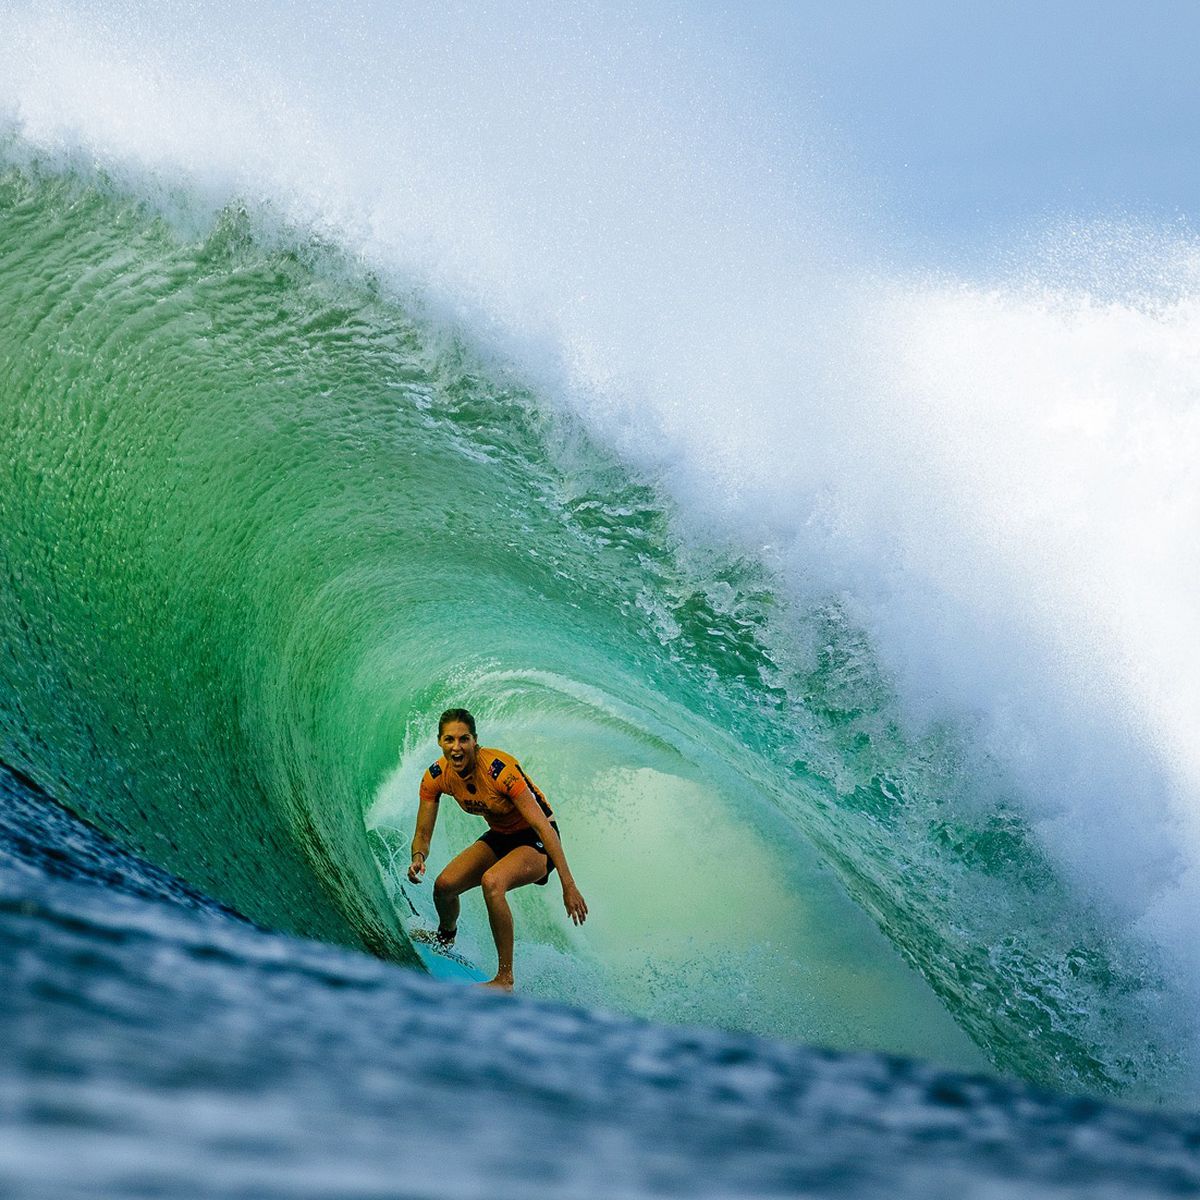 How To Watch World Surf League On TV